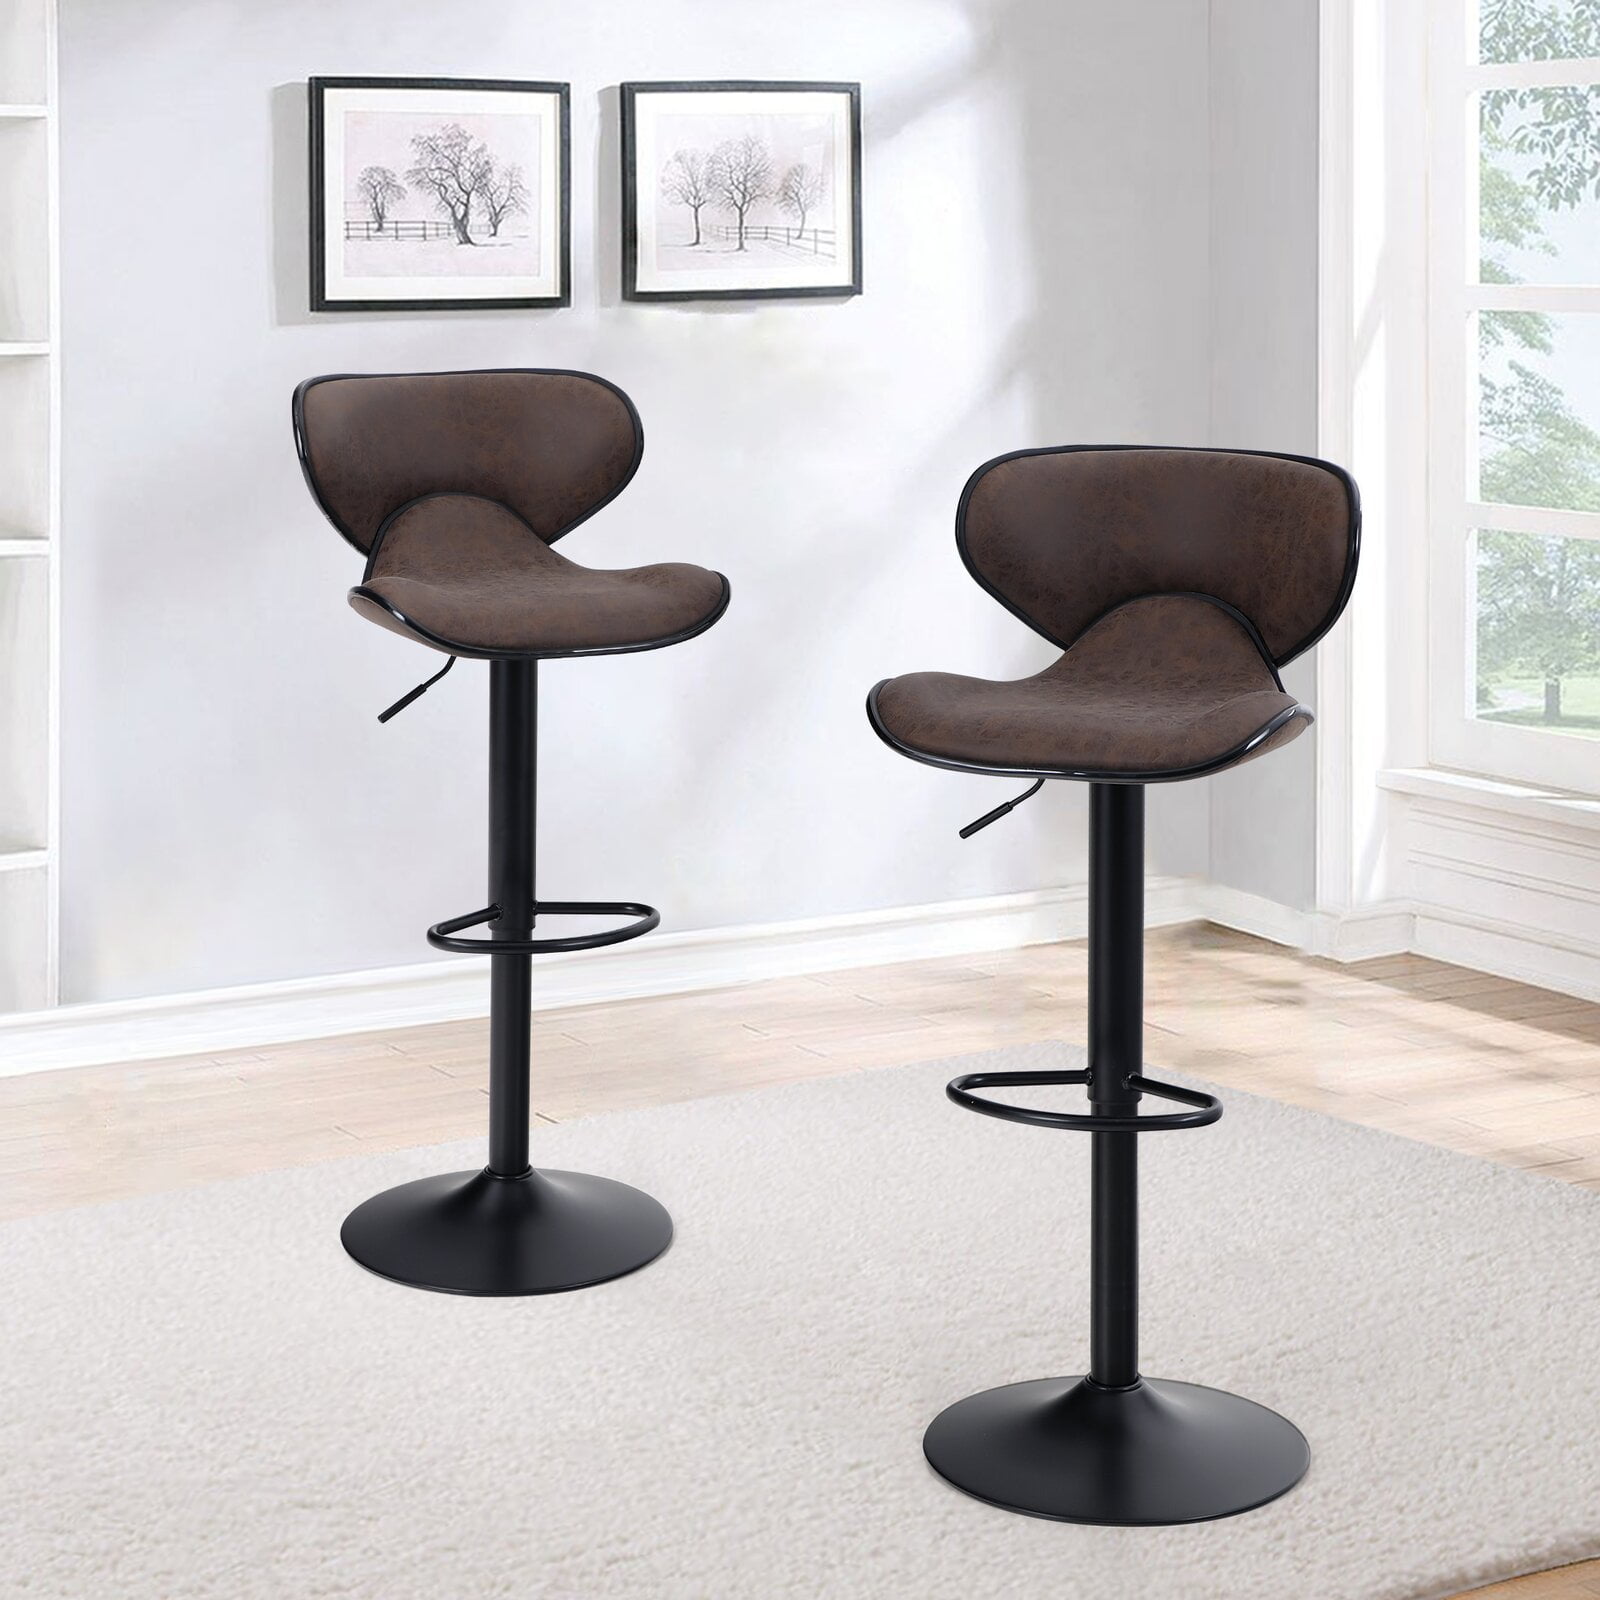 New Set Of 2 Adjustable Height Swivel Bar Stools w/ Base Counter Height Stools 